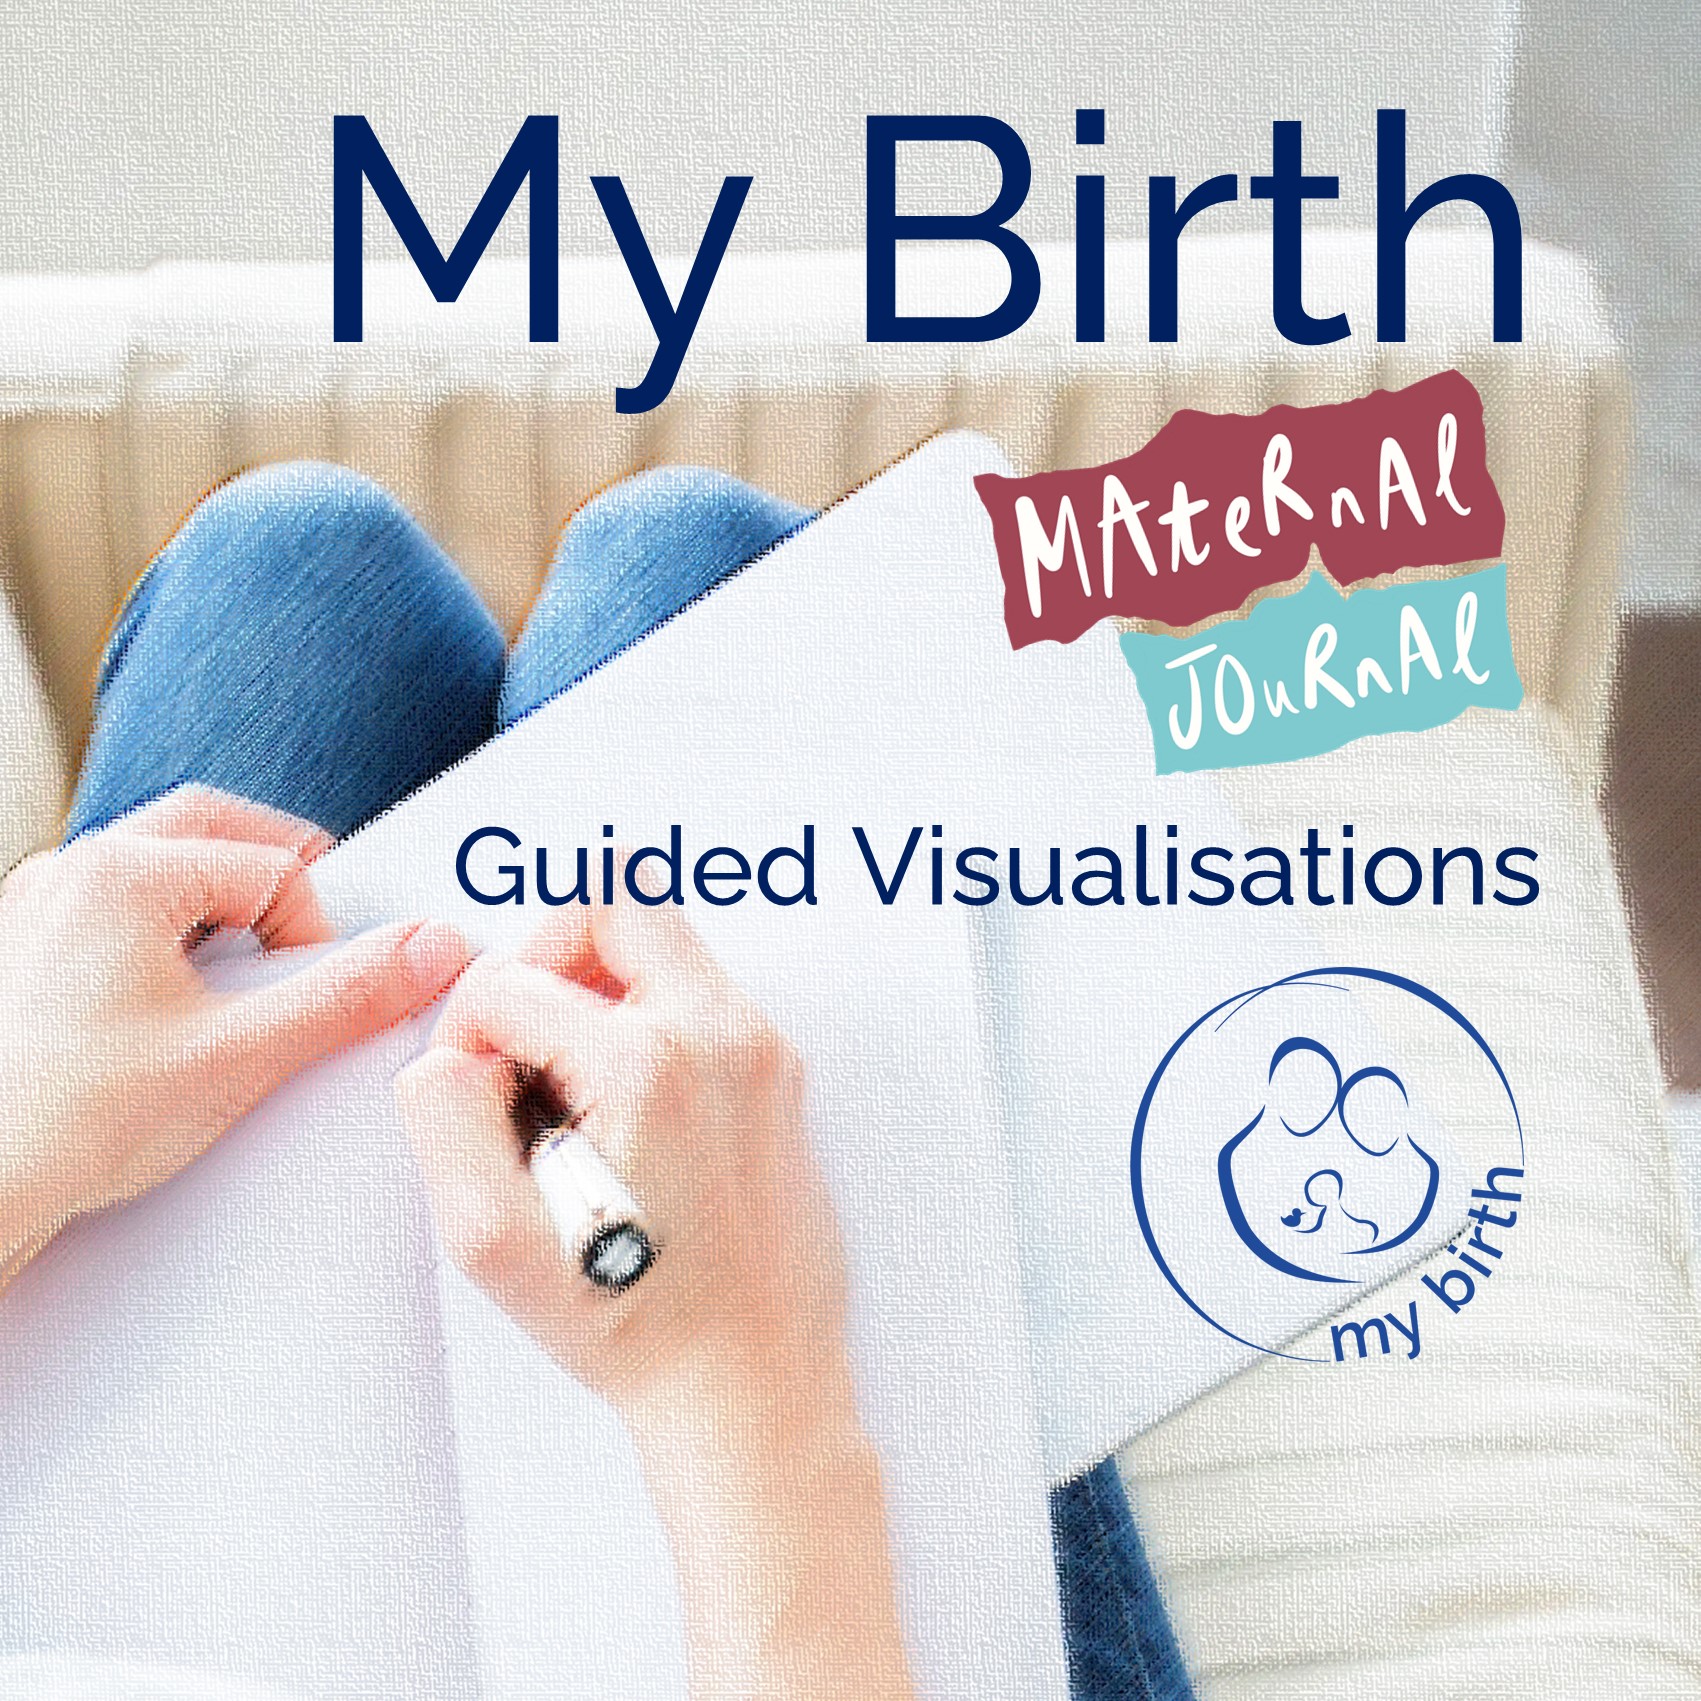 Podcast title picture, says My Birth Maternal Journal Guided Visualisations and has a picture of someone drawing in a journal.